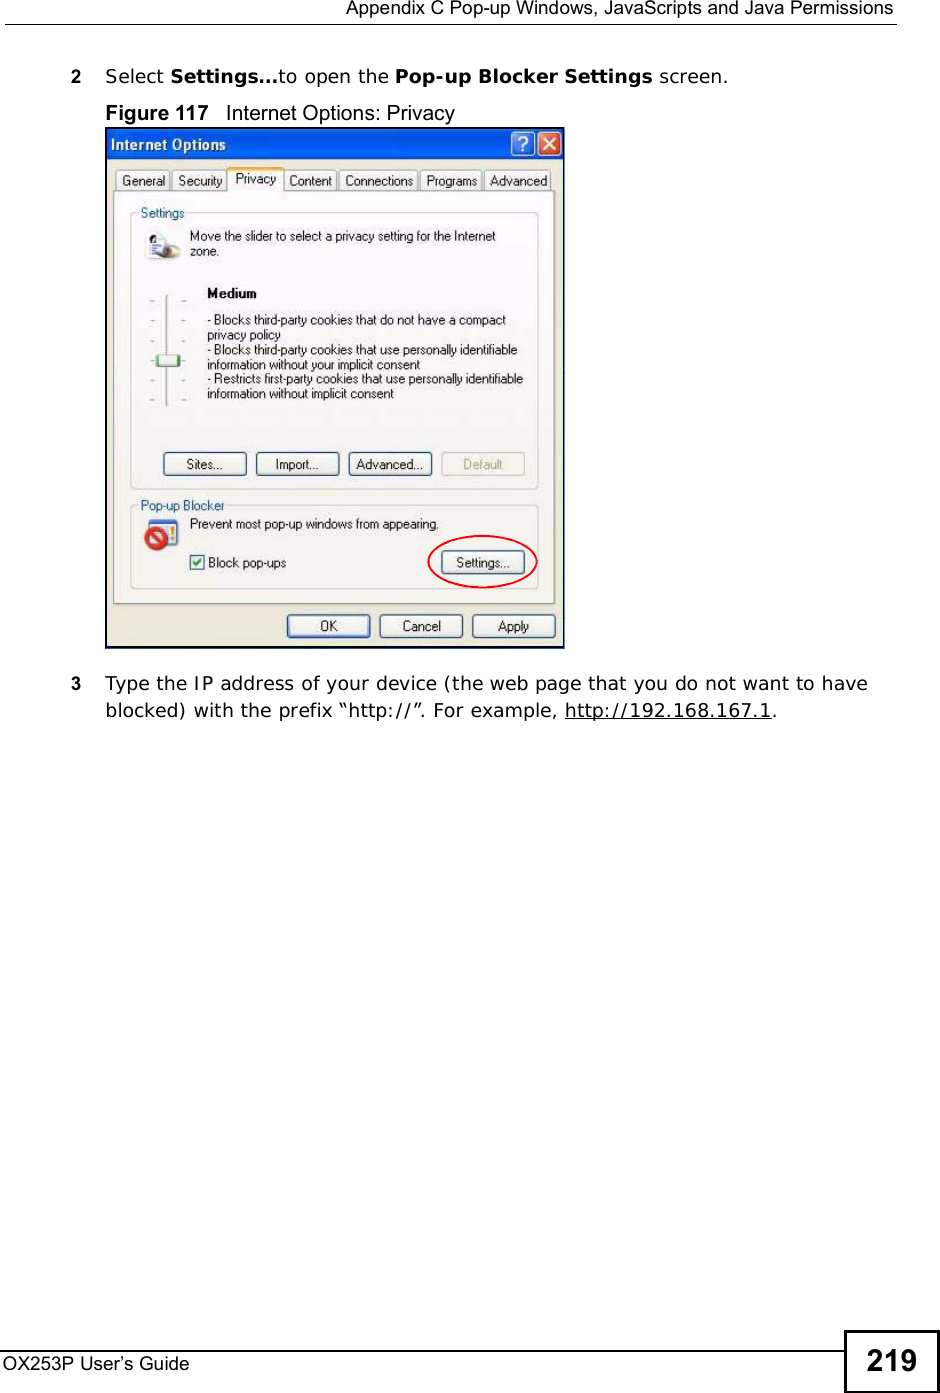  Appendix CPop-up Windows, JavaScripts and Java PermissionsOX253P User’s Guide 2192Select Settings…to open the Pop-up Blocker Settings screen.Figure 117   Internet Options: Privacy3Type the IP address of your device (the web page that you do not want to have blocked) with the prefix “http://”. For example, http://192.168.167.1. 